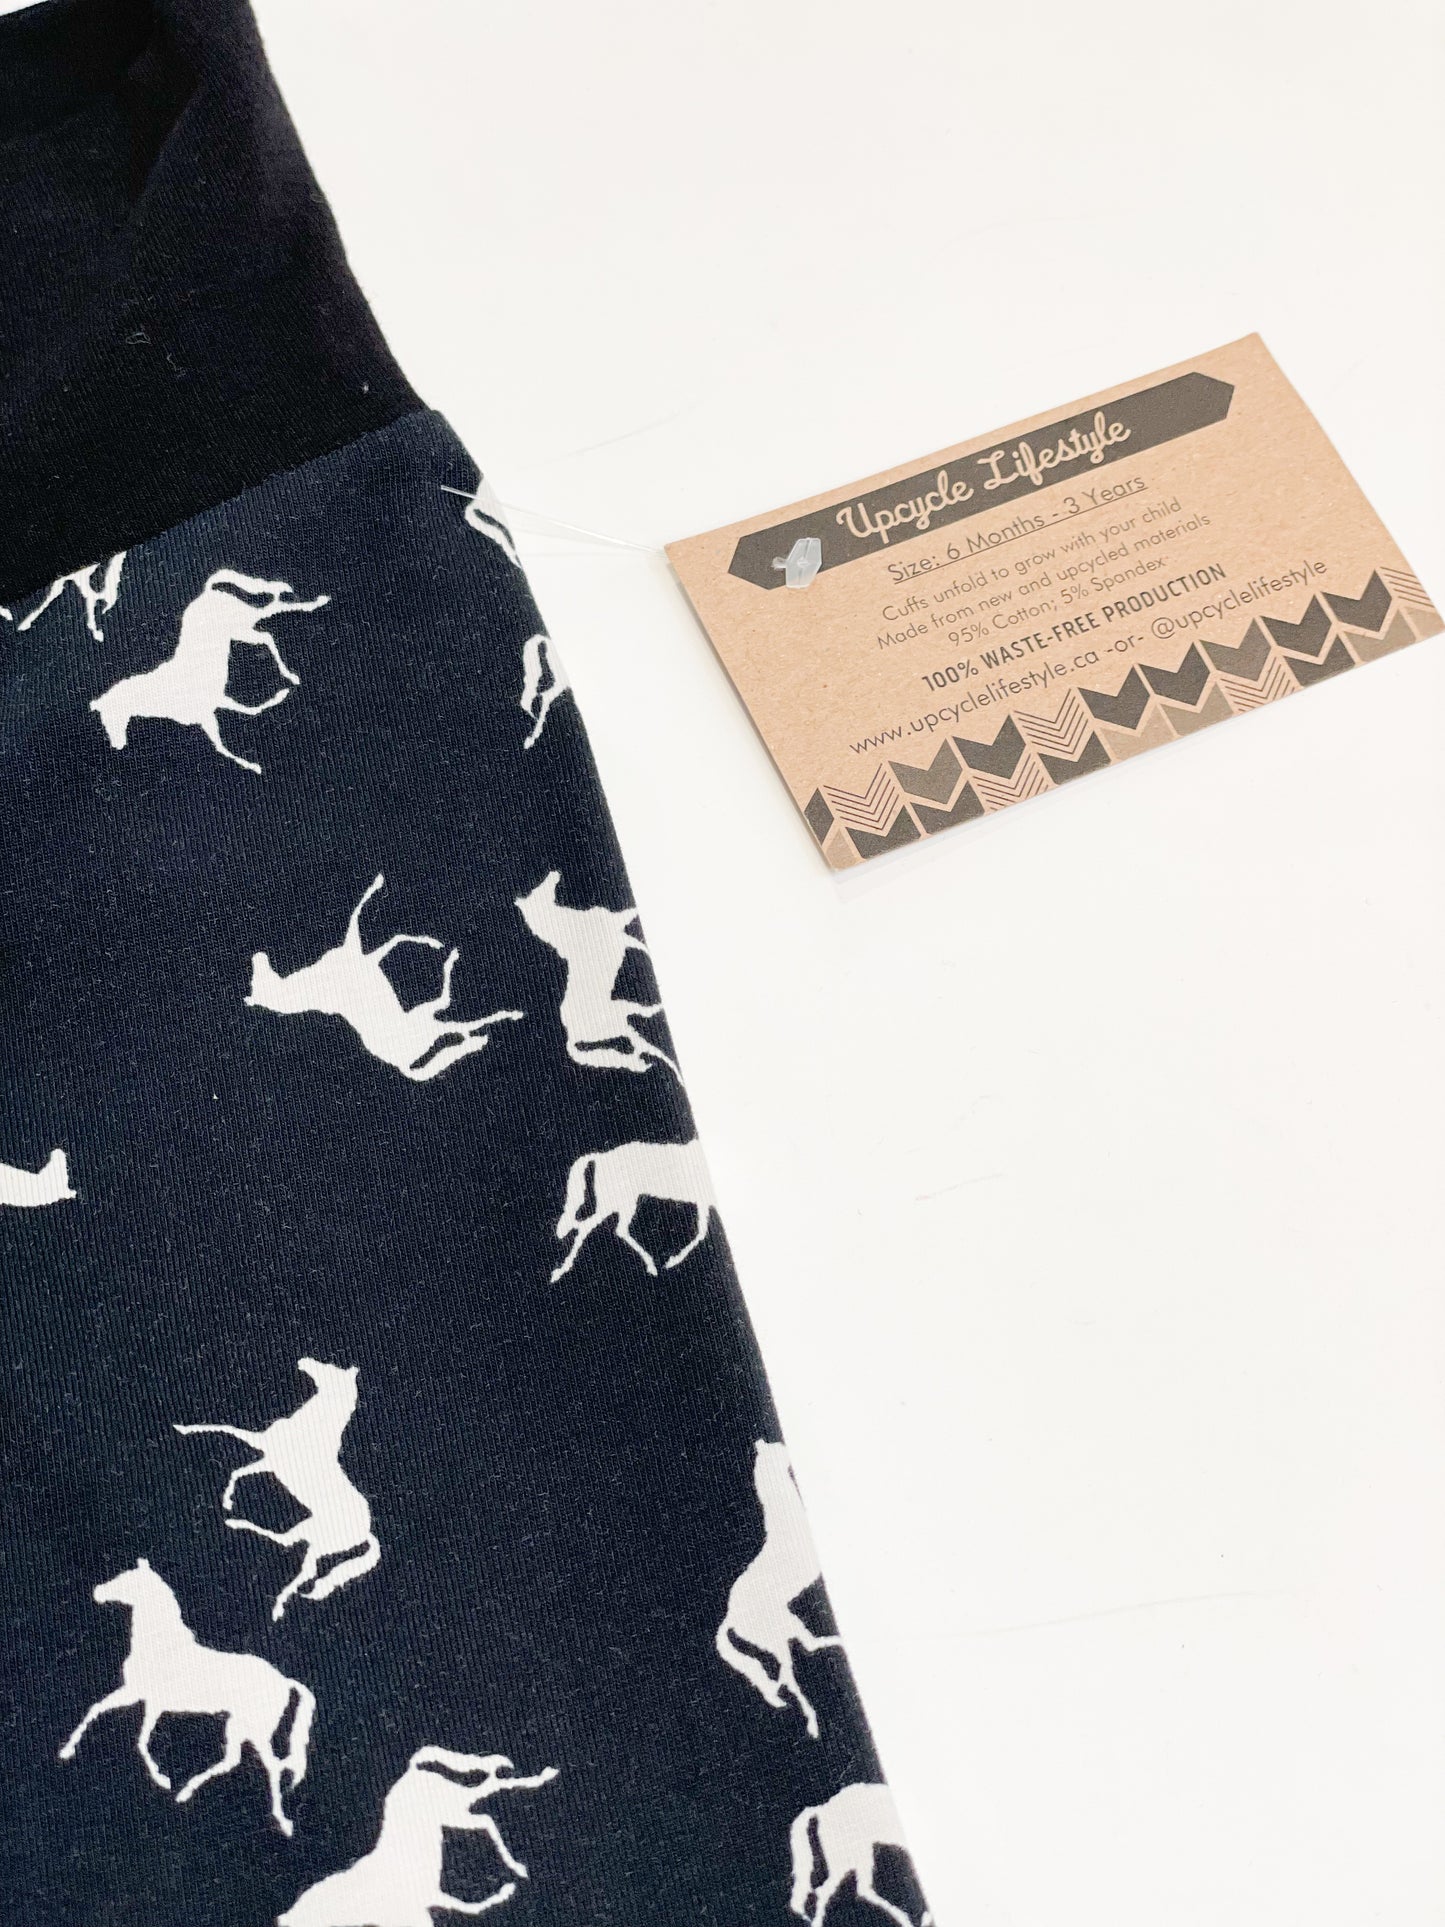 Navy Horse Grow-With-Me Baby Leggings - 6 Months to 3 Years